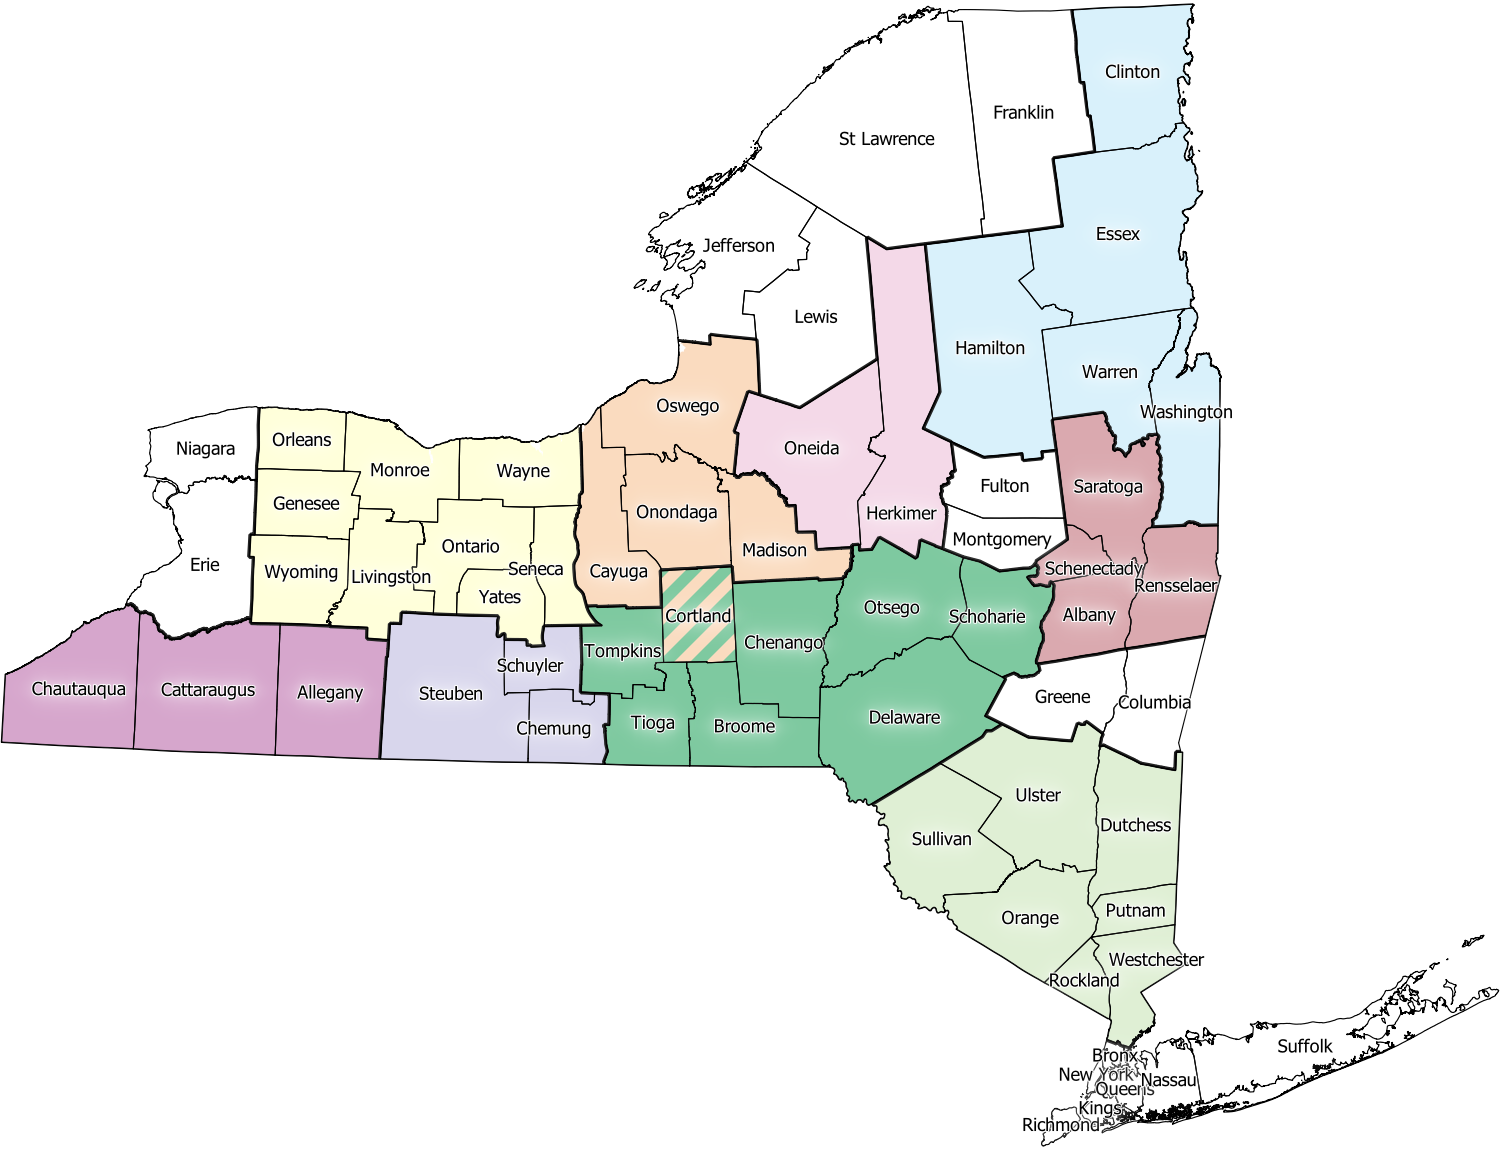 Image: The NYSARC Regions